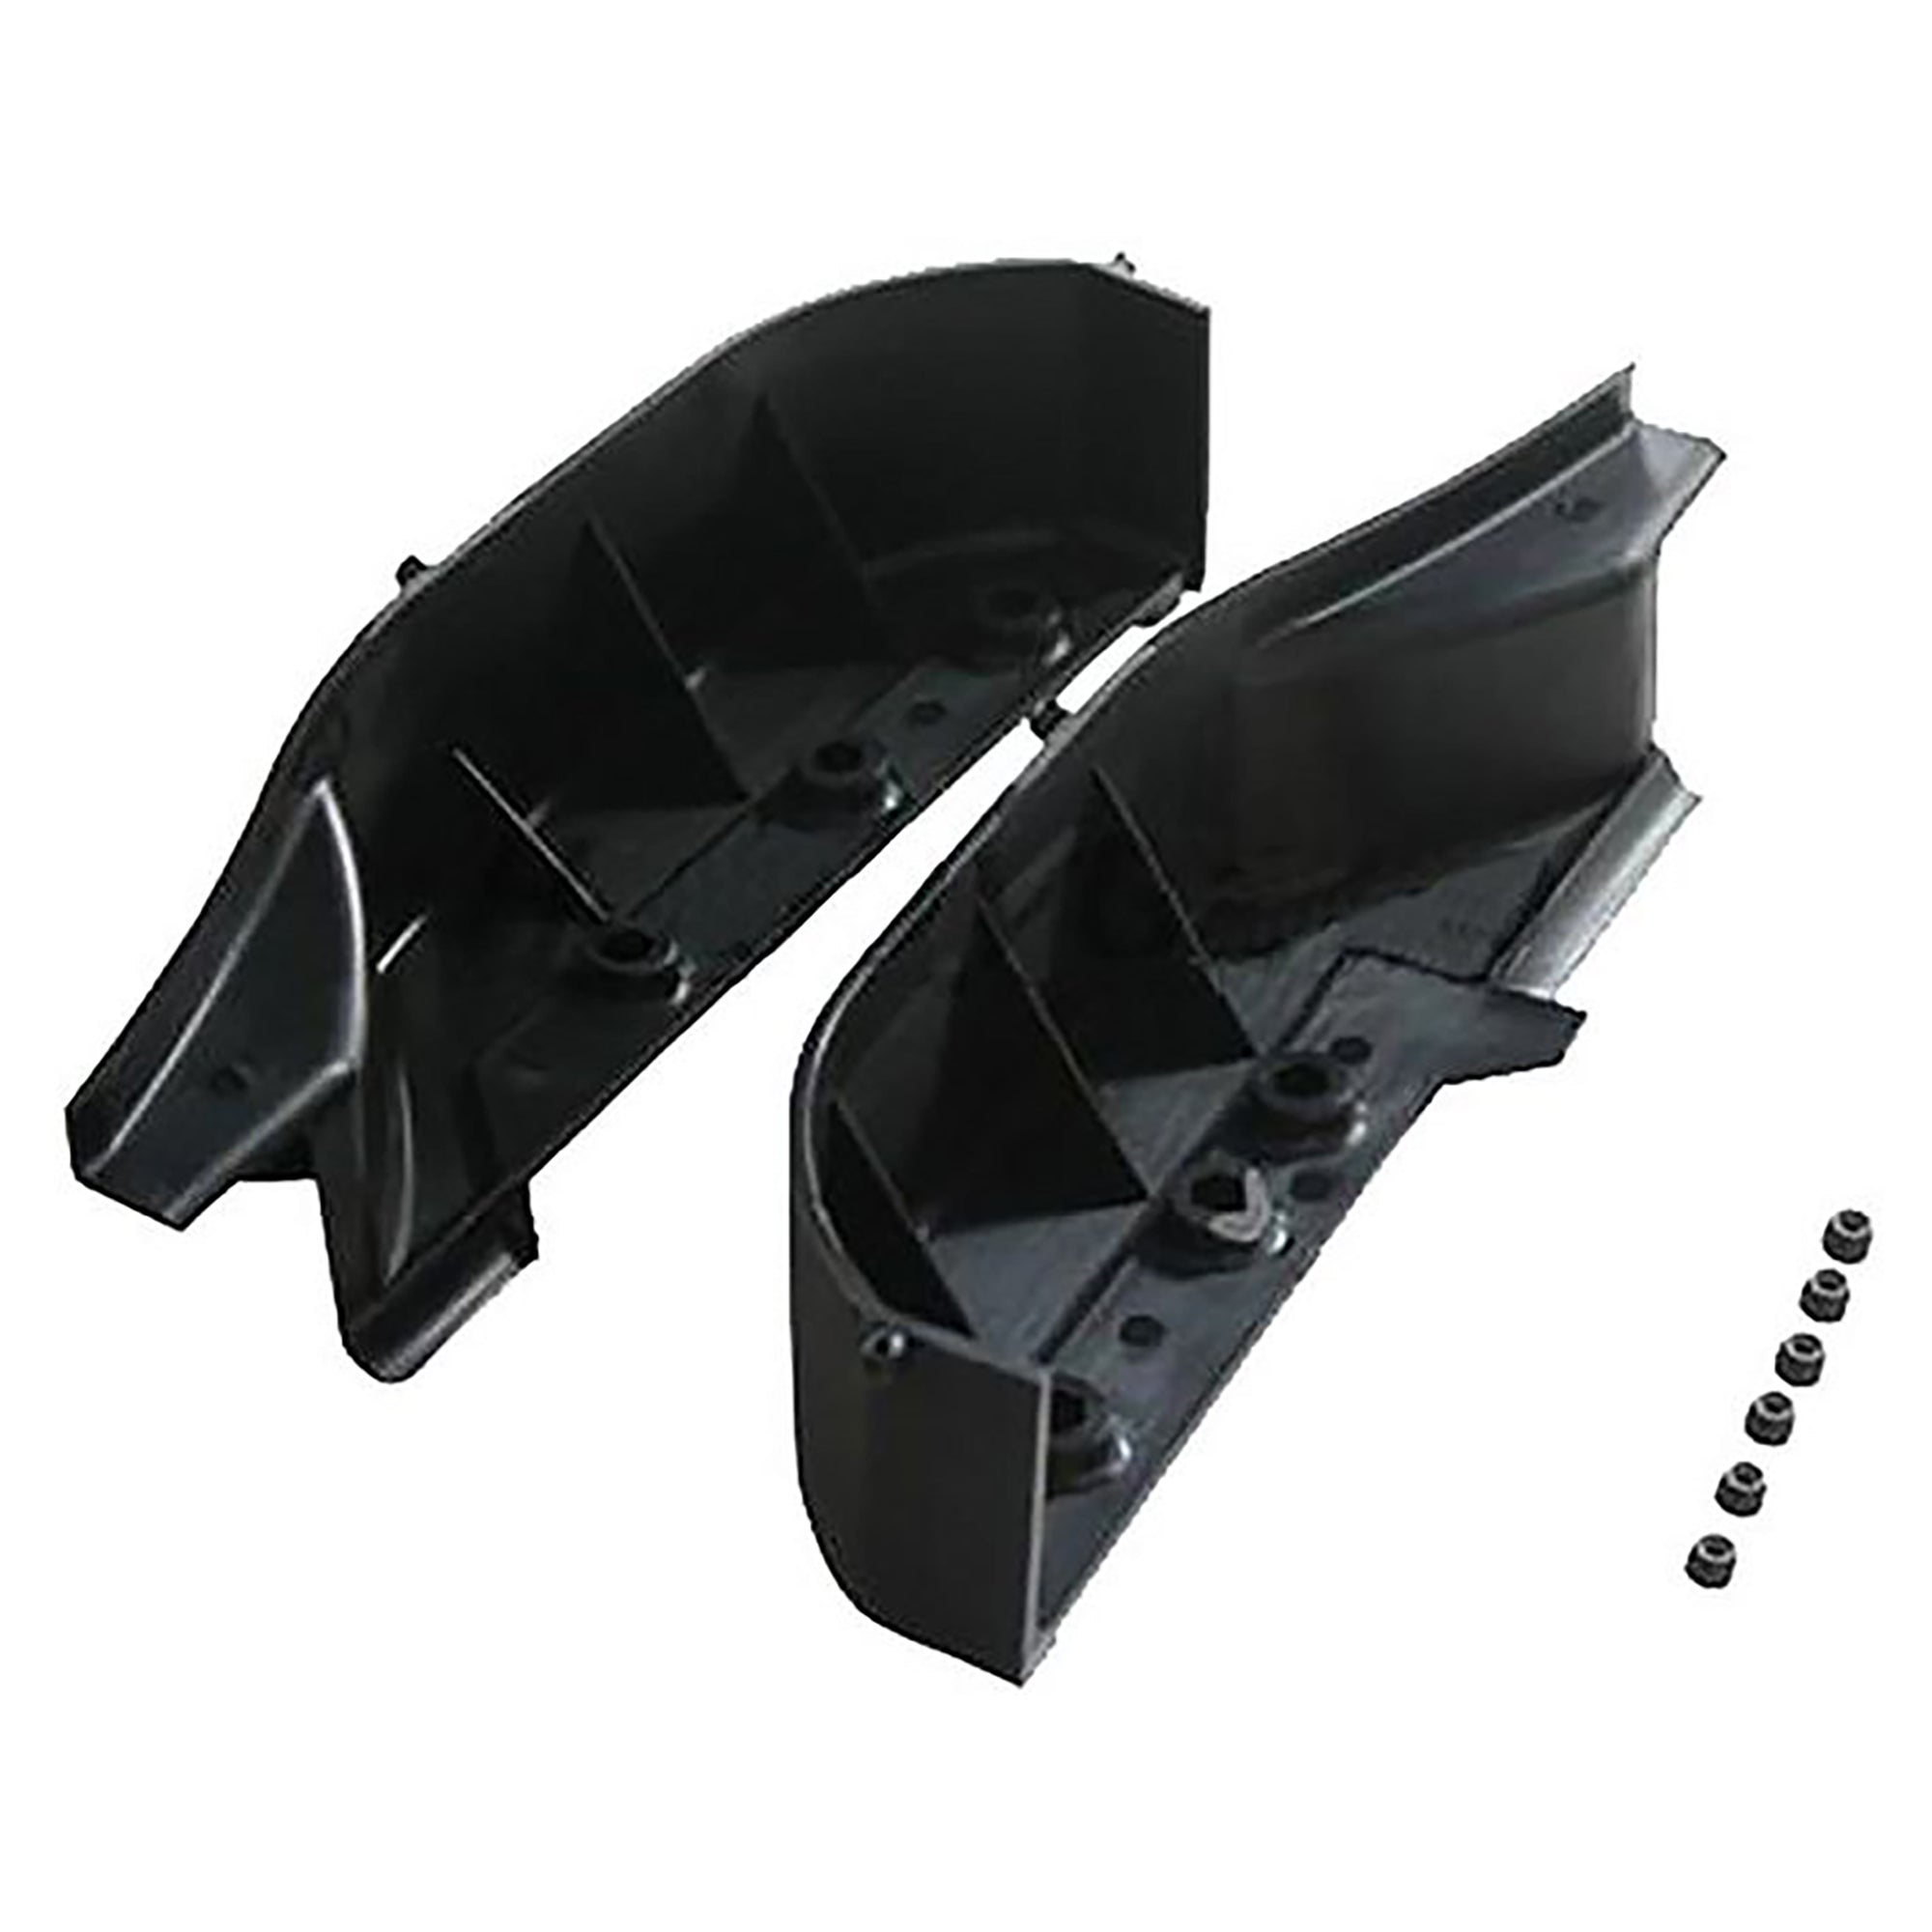 HSP Racing 54025 Side Guards